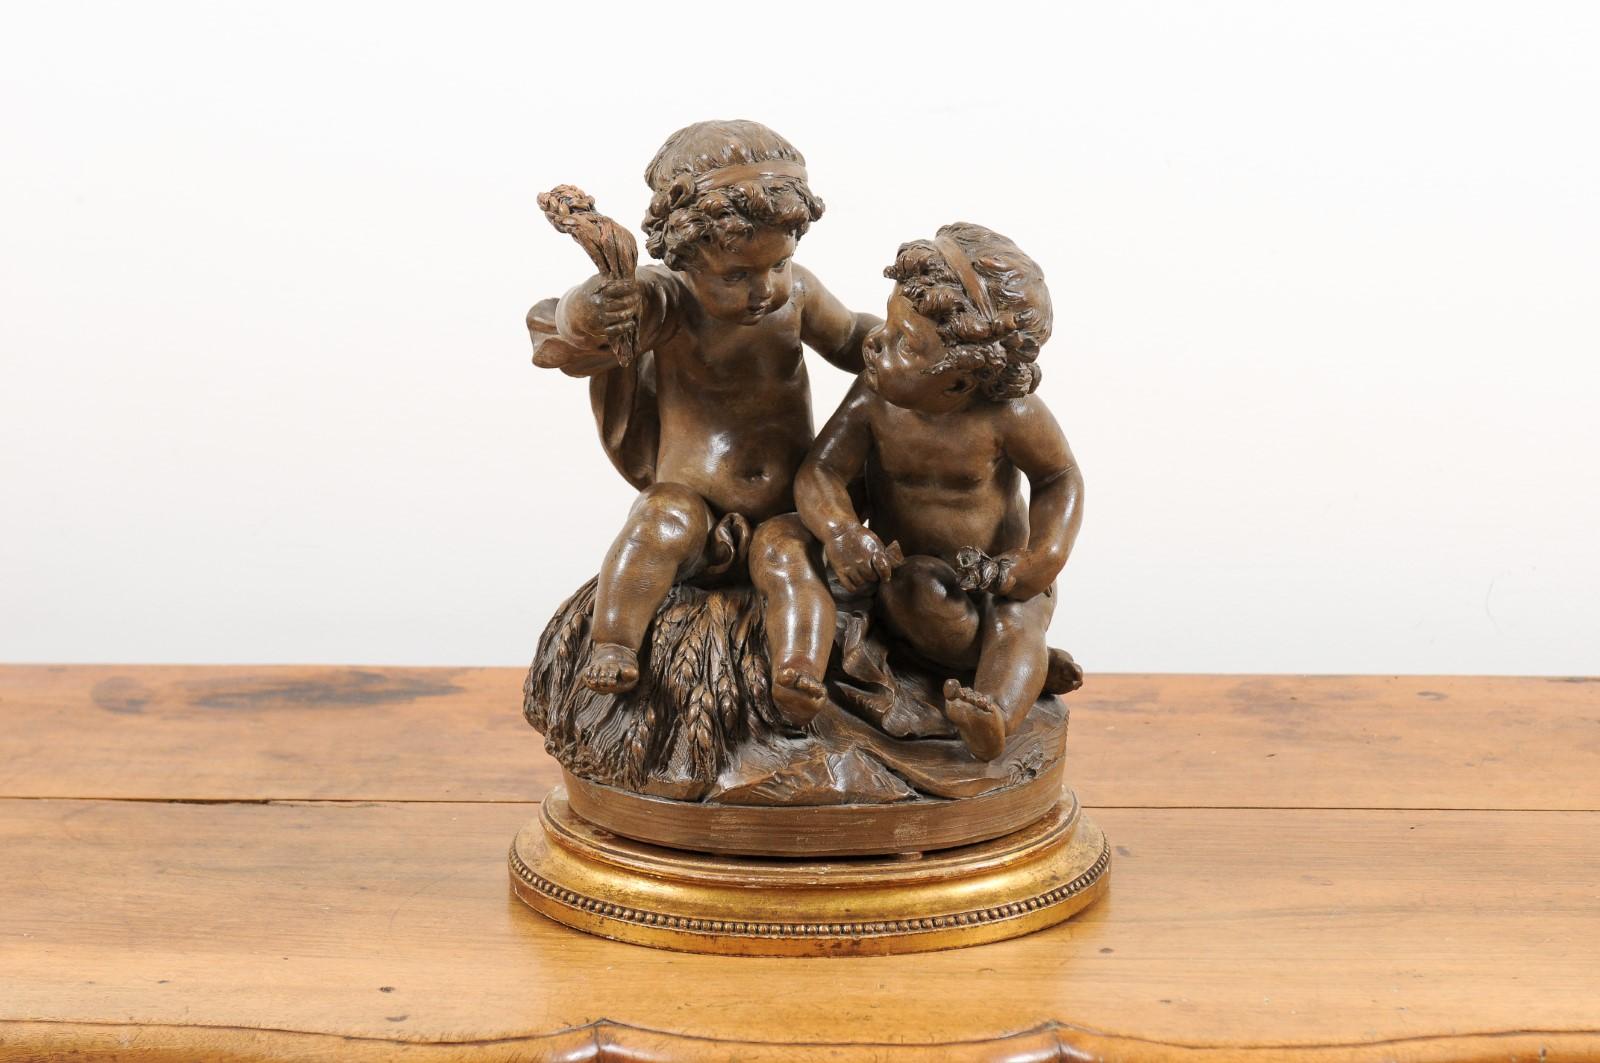 A petite French Louis-Philippe terracotta sculpture from the mid 19th century, depicting two putti on an oval base. Created in France during the second quarter of the 19th century, this petite terracotta sculpture draws our attention with its